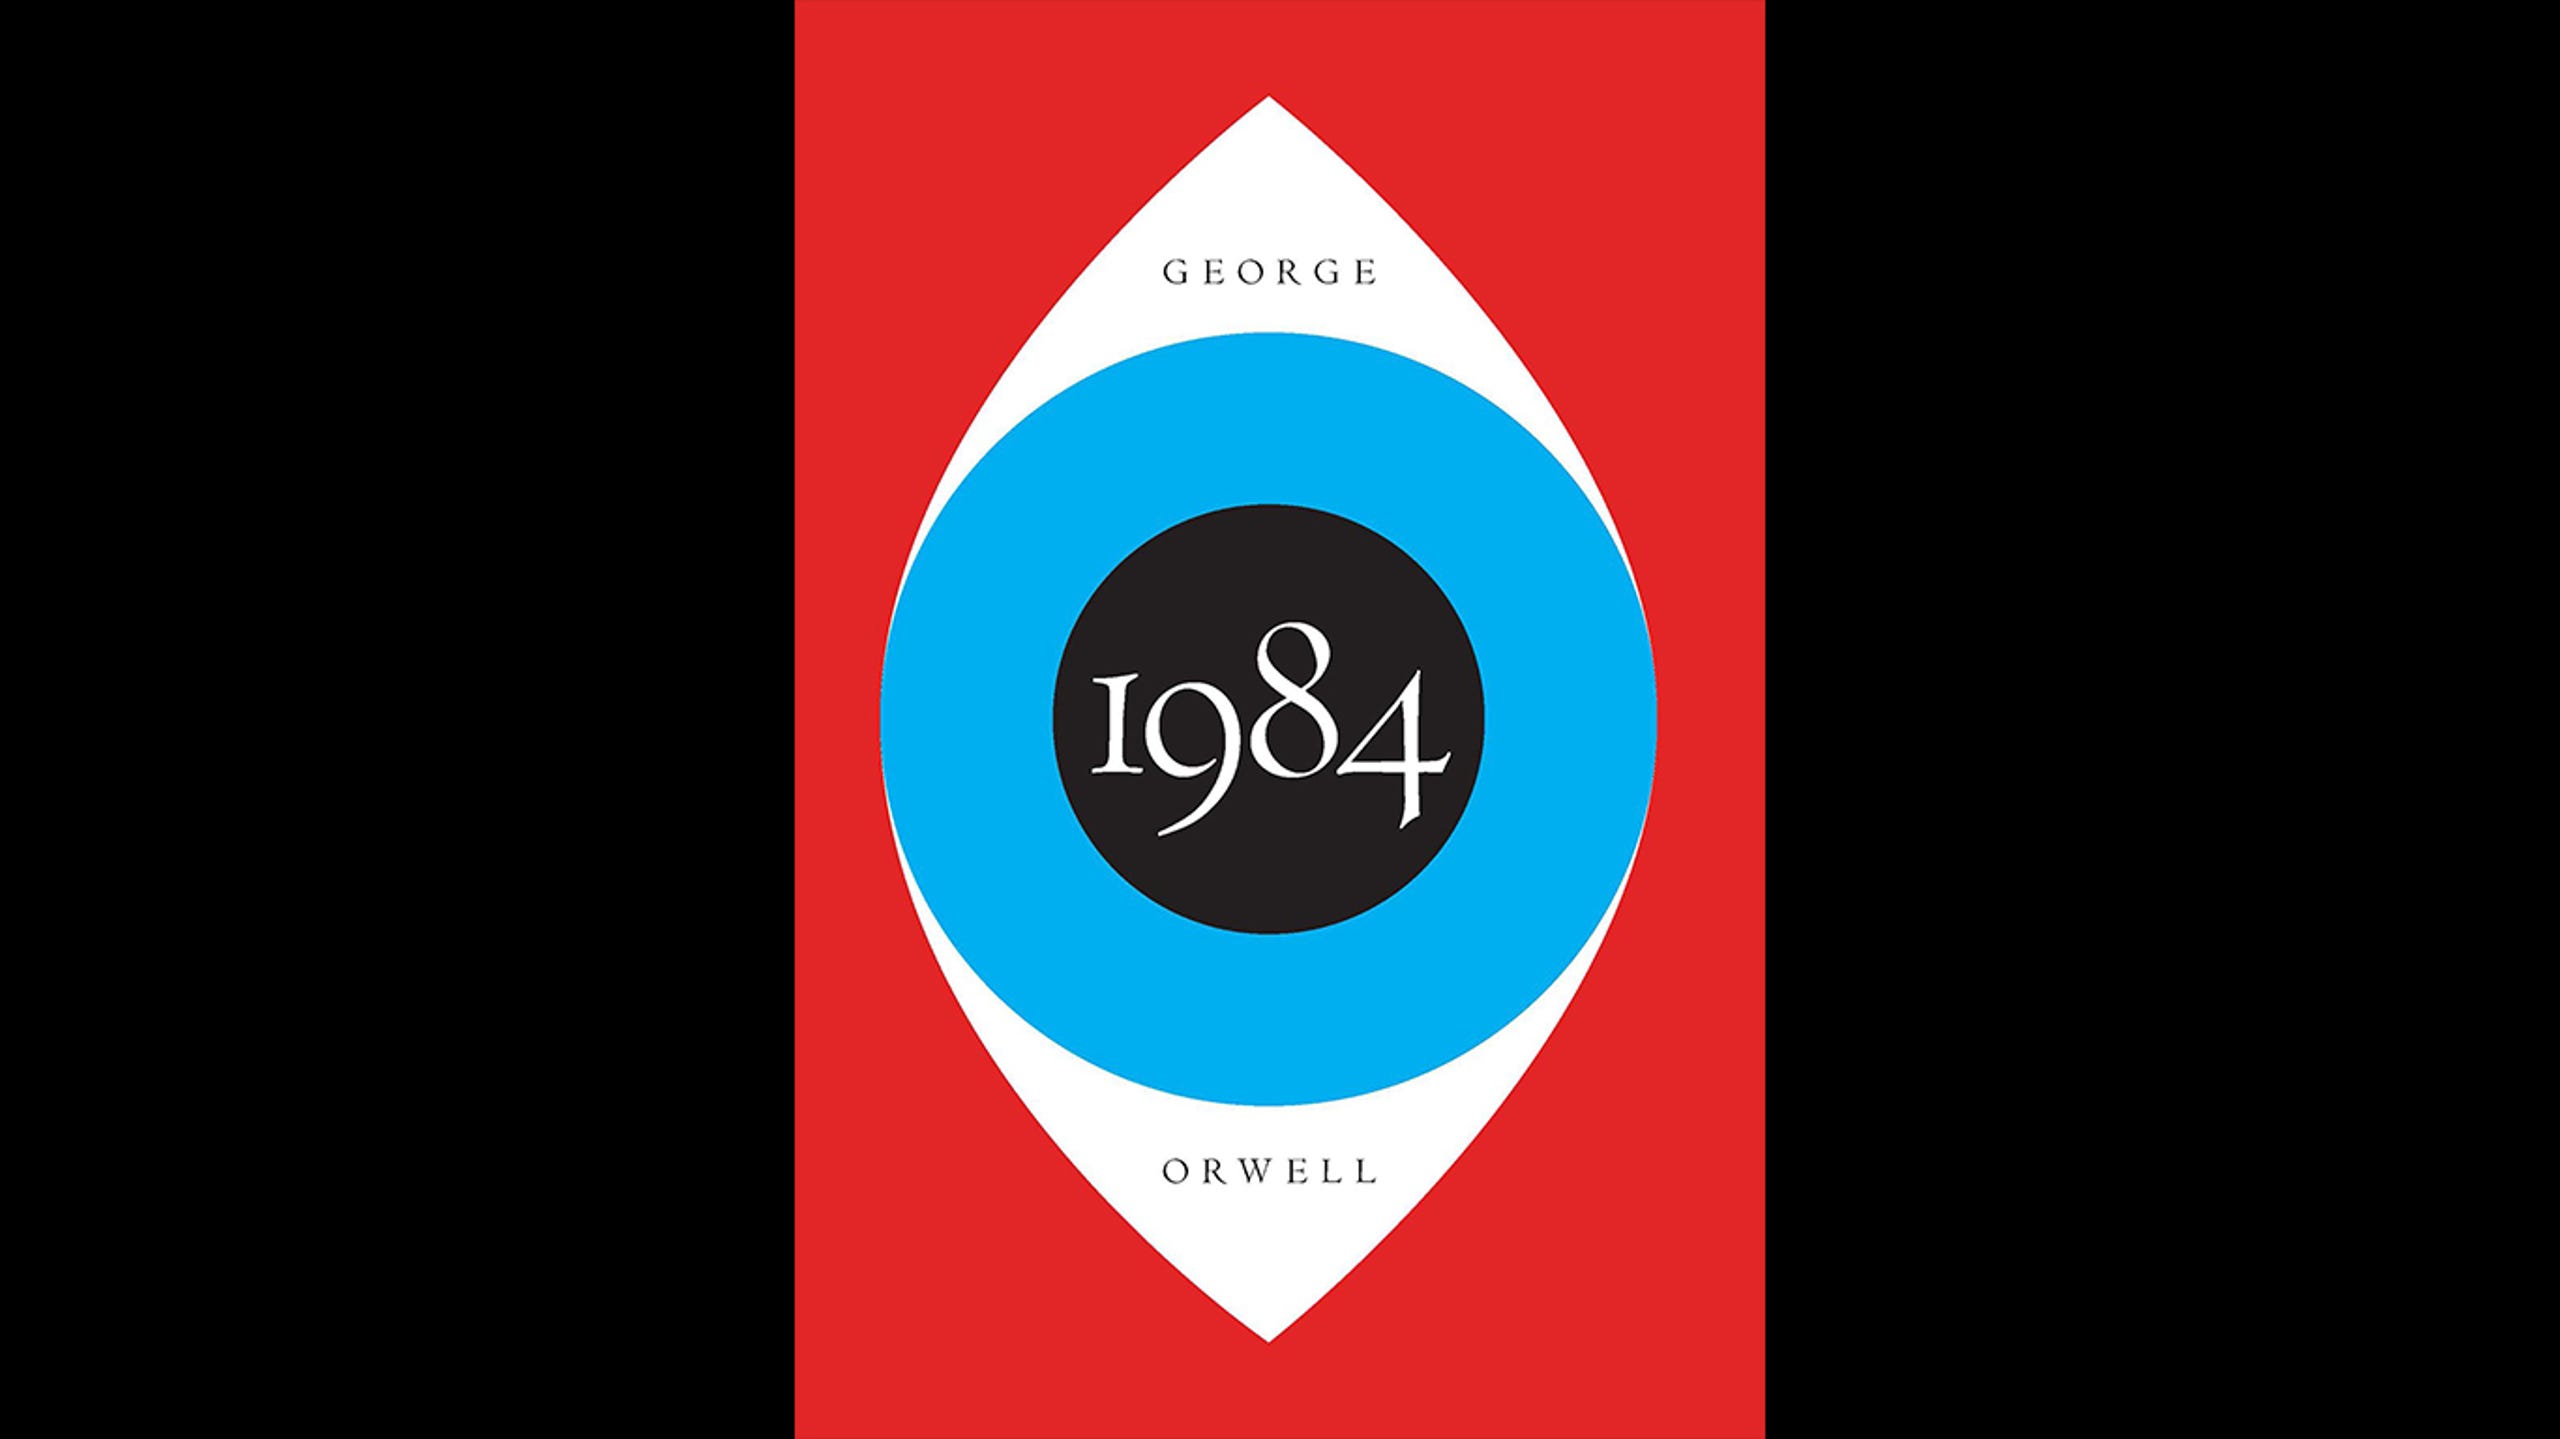 <strong>10. 1984 </strong><strong>• Author:</strong> George Orwell <strong>• Originally published in:</strong> 1949 <strong>• "</strong>1984"  is one of the most widely-read and widely-referenced works of dystopian speculative fiction. It's not just about censorship; one of the book's main points is how technology helps create a mindless society. Another important factor that makes the novel a classic is the "fear-mongering and mind control being used in a dystopic totalitarian society by soulless hate ghouls and dictators," Uruburu noted.